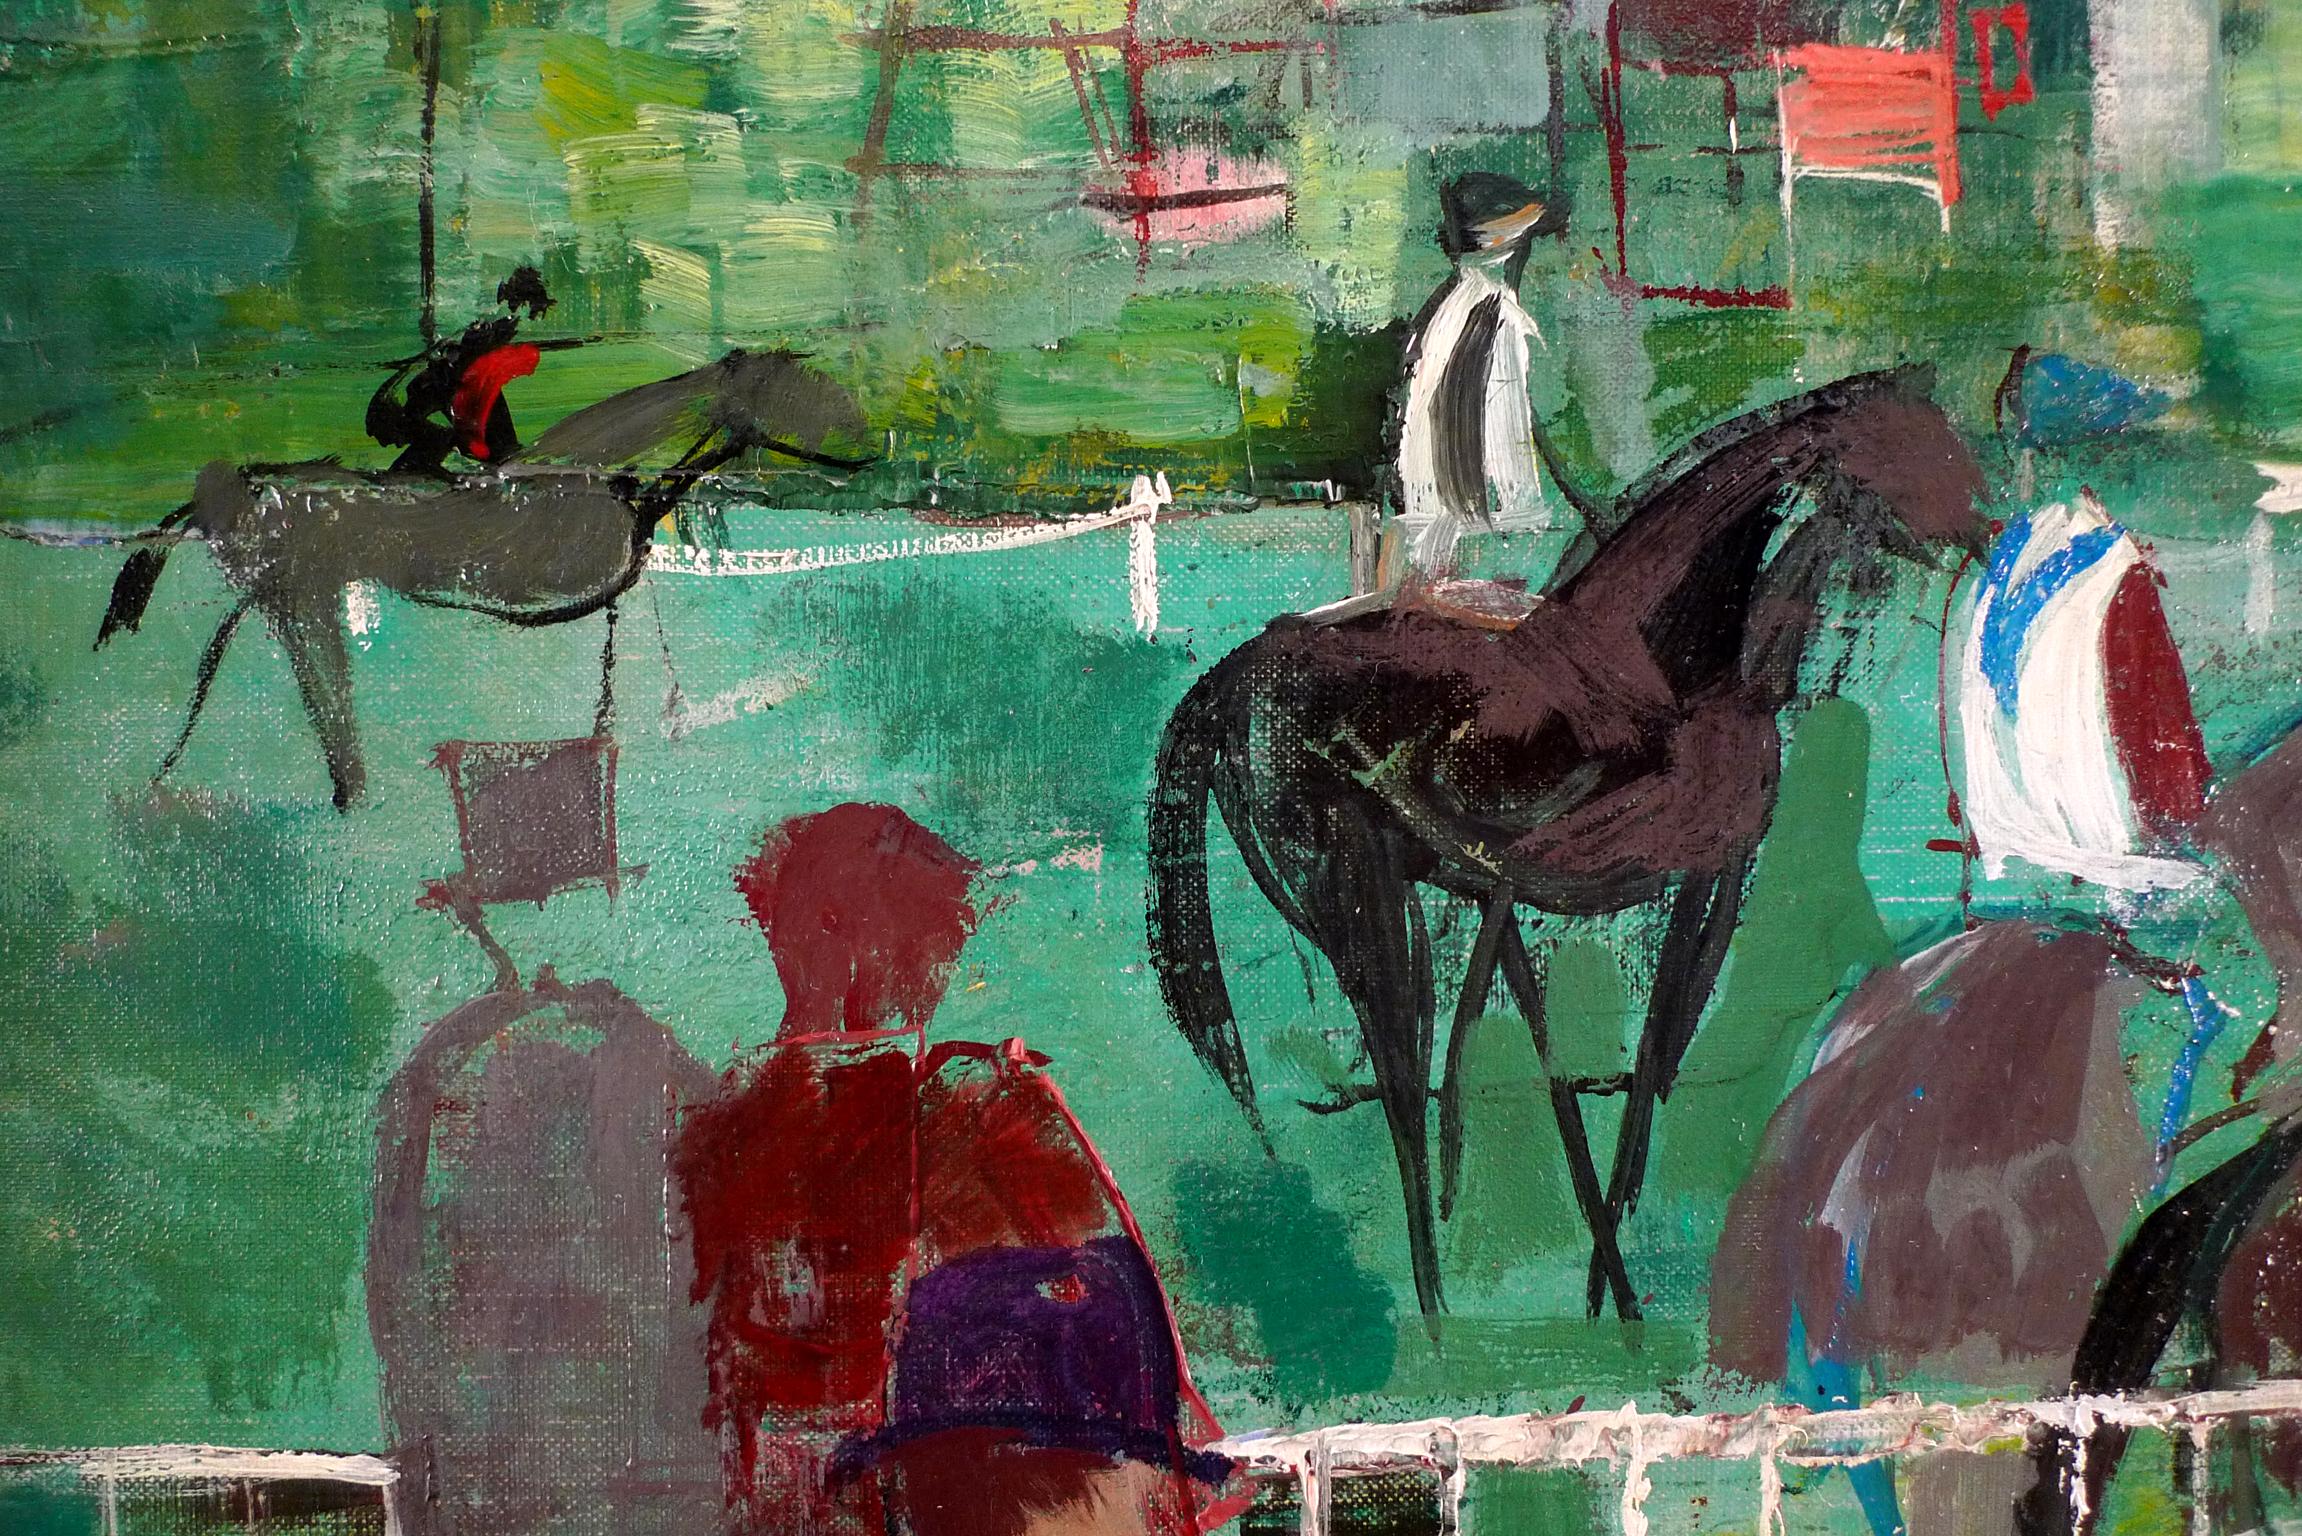 EMILIO GRAU SALA
Spanish, 1911 - 1975
PADDOCK AT DEAUVILLE, 1964
signed Grau Sala (lower left)
signed again,  dated and located 